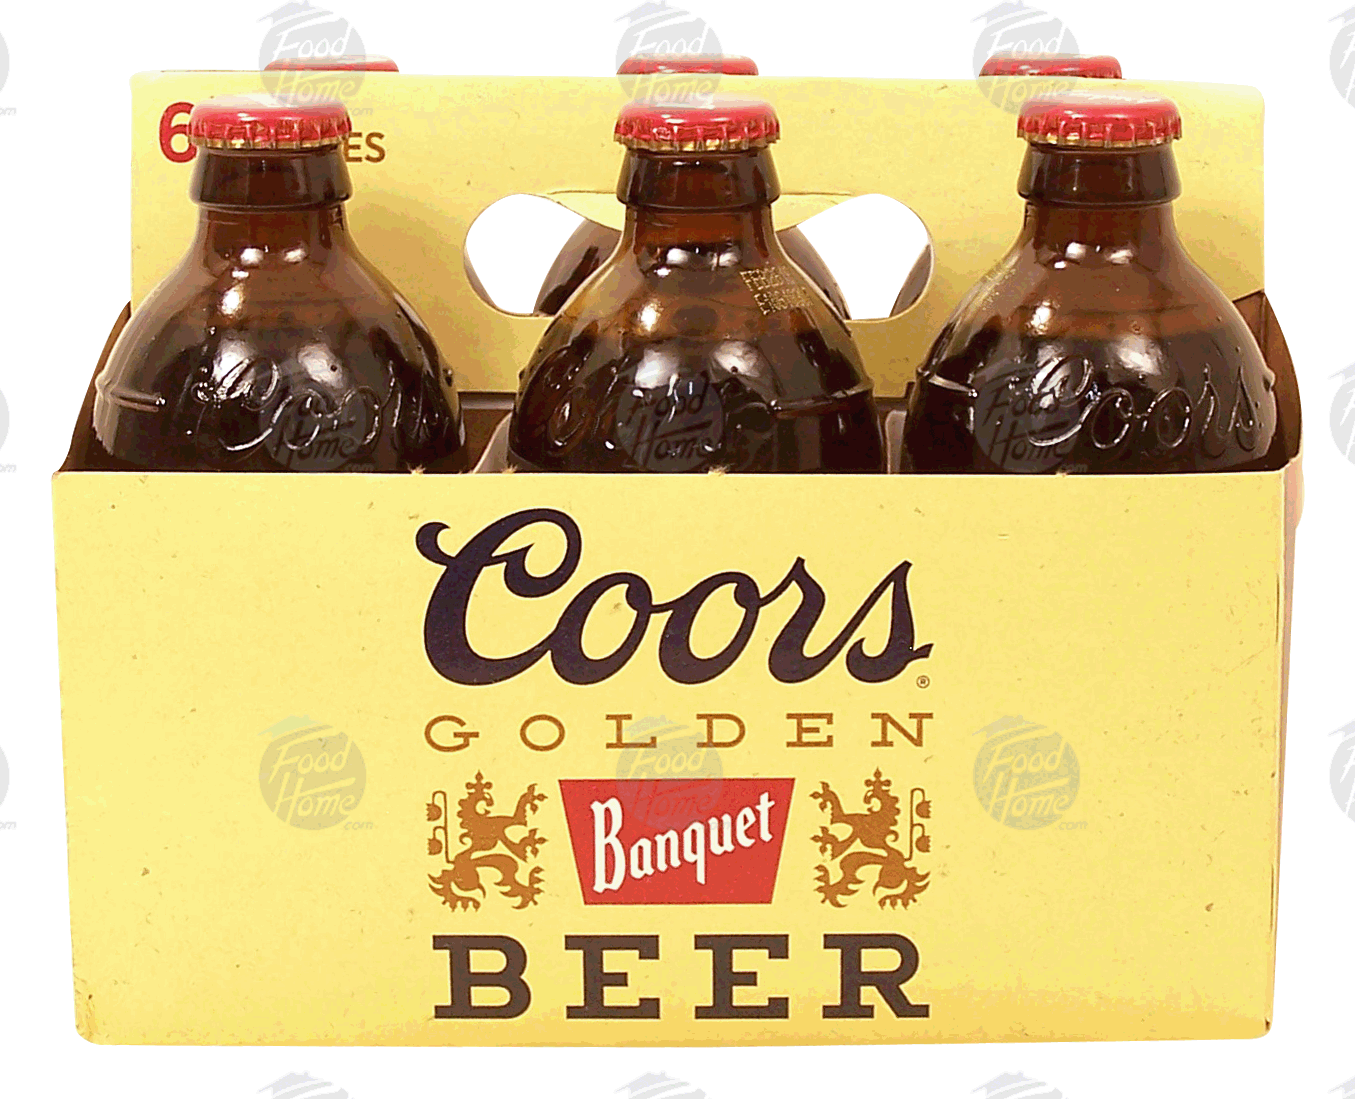 Coors Banquet Golden beer, 12-fl. oz. Full-Size Picture